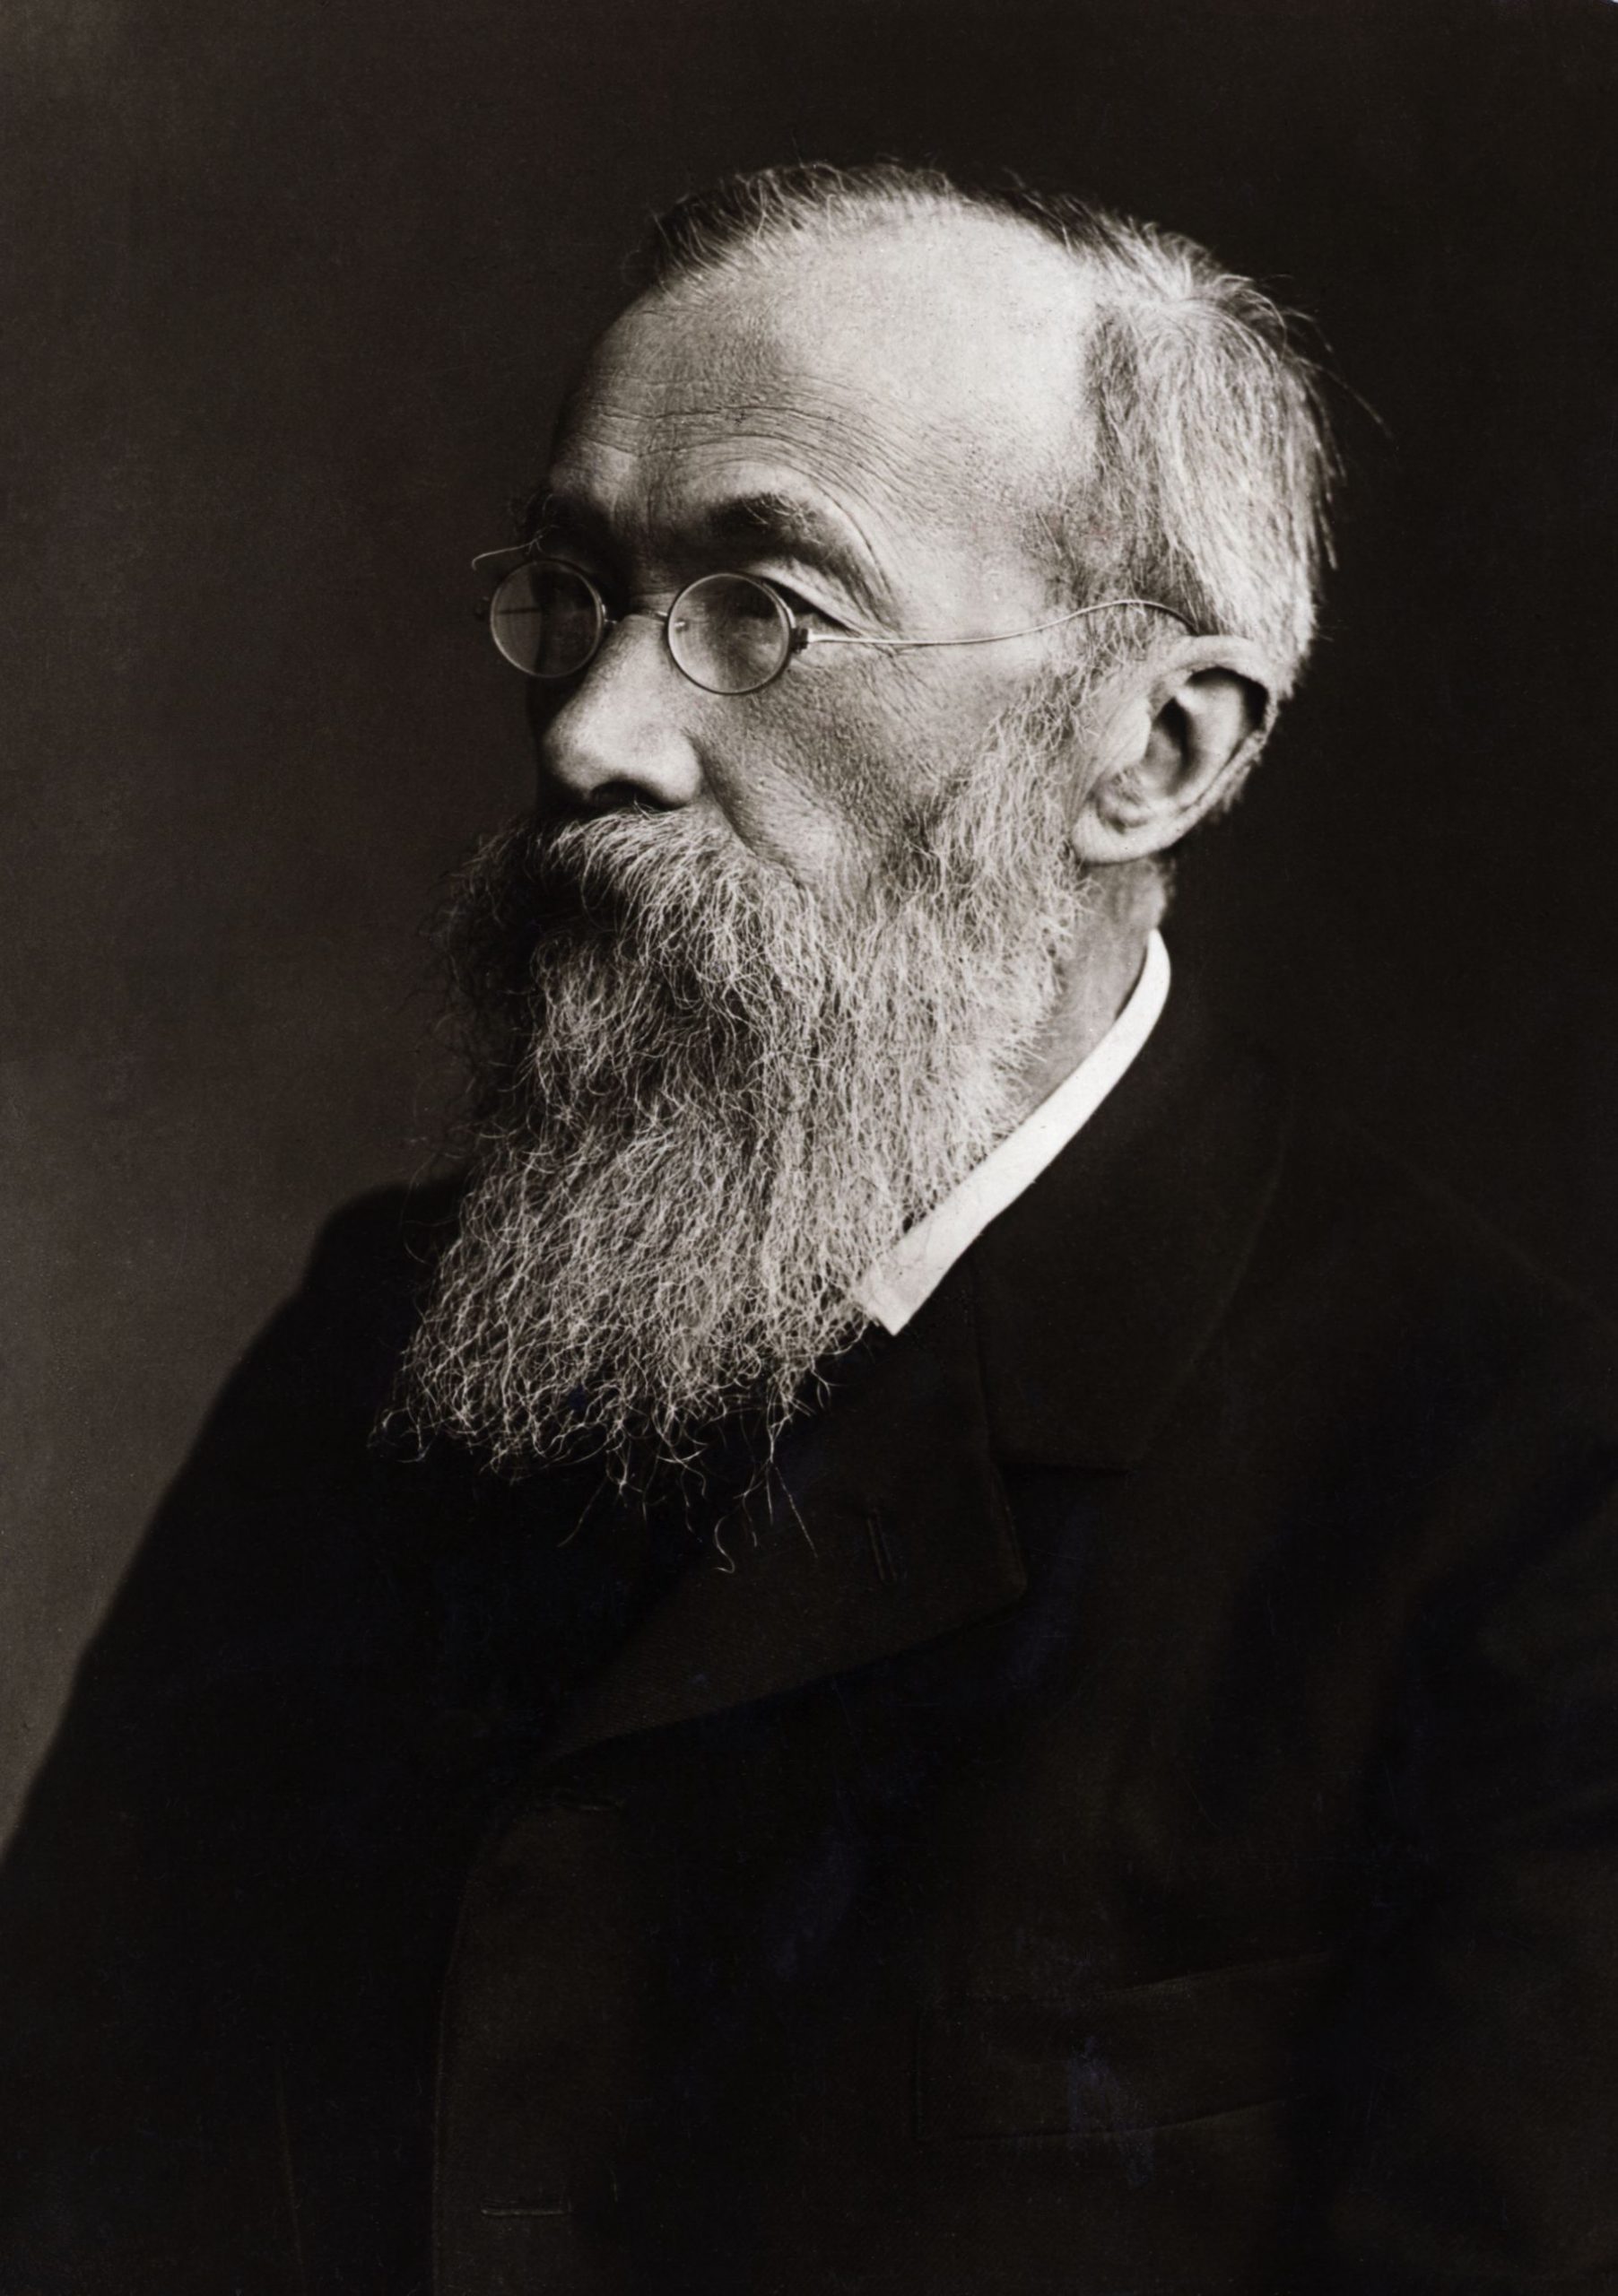 Profile of Wilhelm Wundt, the Father of Psychology